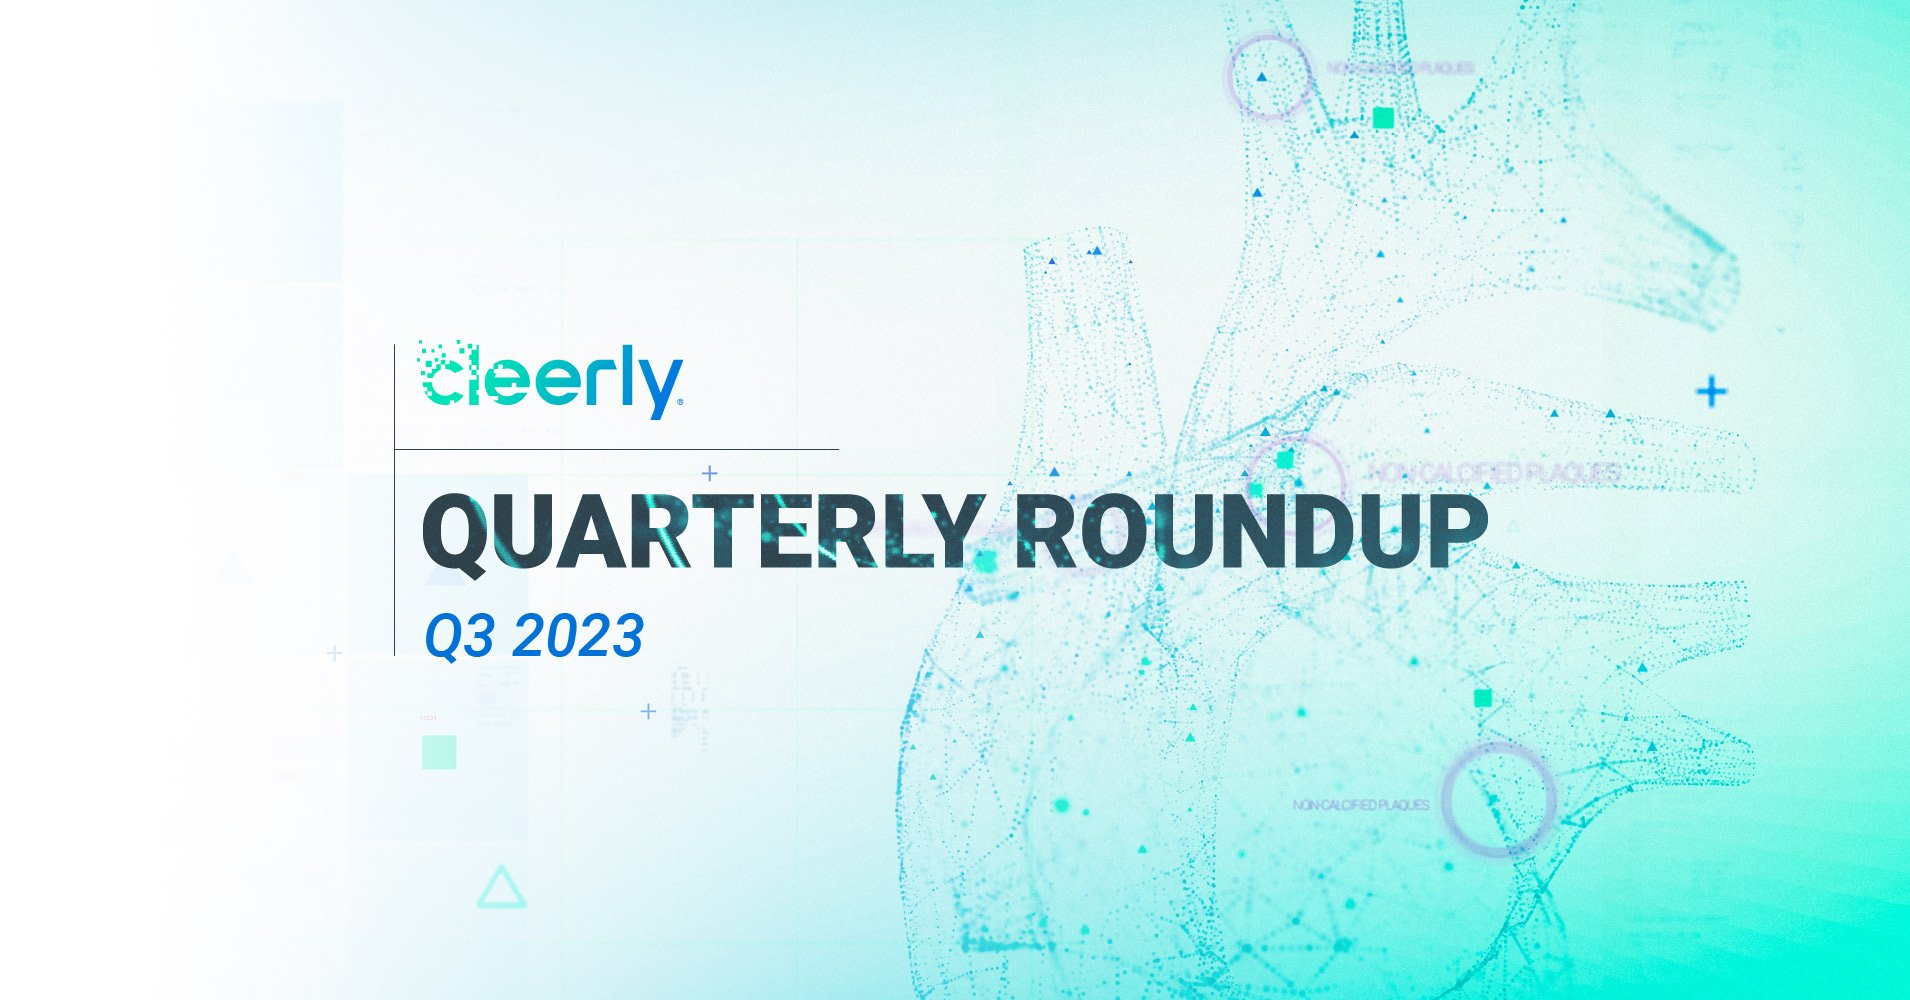 Quarterly Roundup: Cleerly's Impressive Run of Events, Speaking Engagements, and Award Wins as 2023 Winds Down